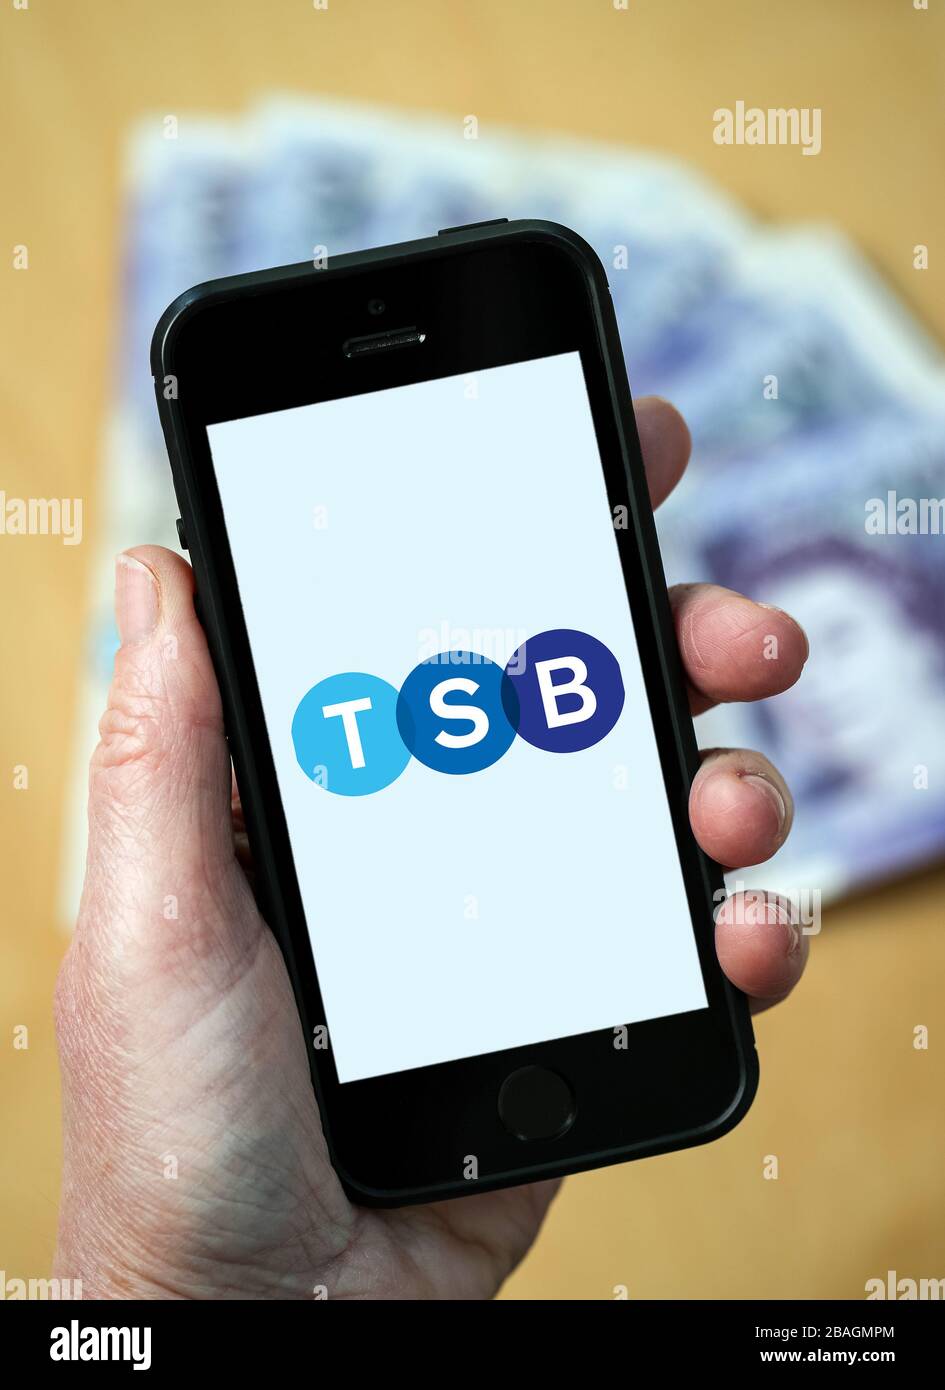 A woman looking at the TSB Bank logo on a mobile phone. (editorial Use Only) Stock Photo